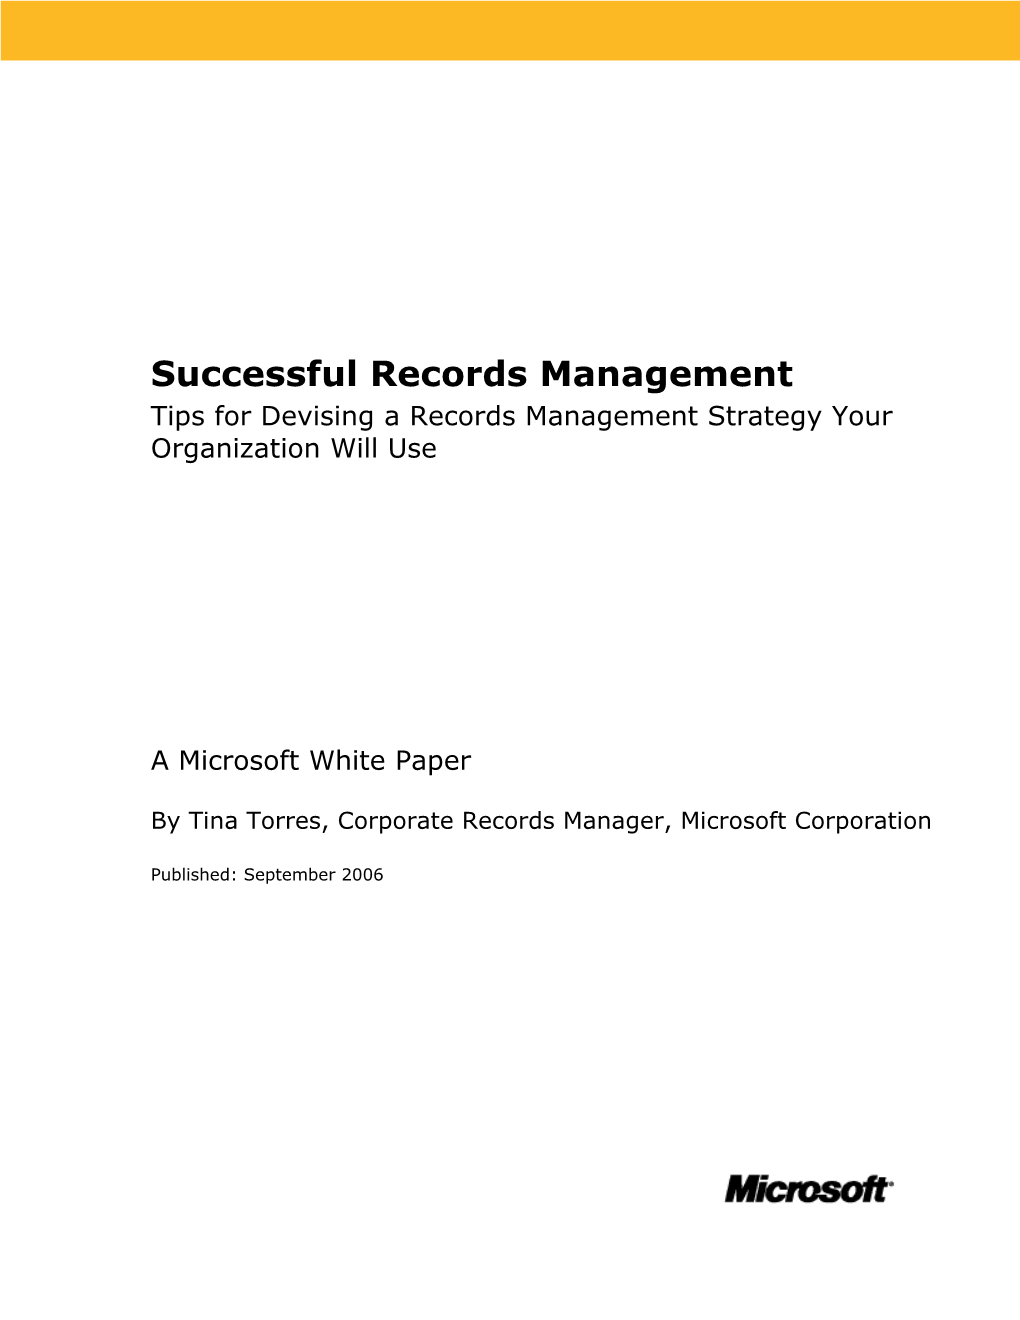 Successful Records Management